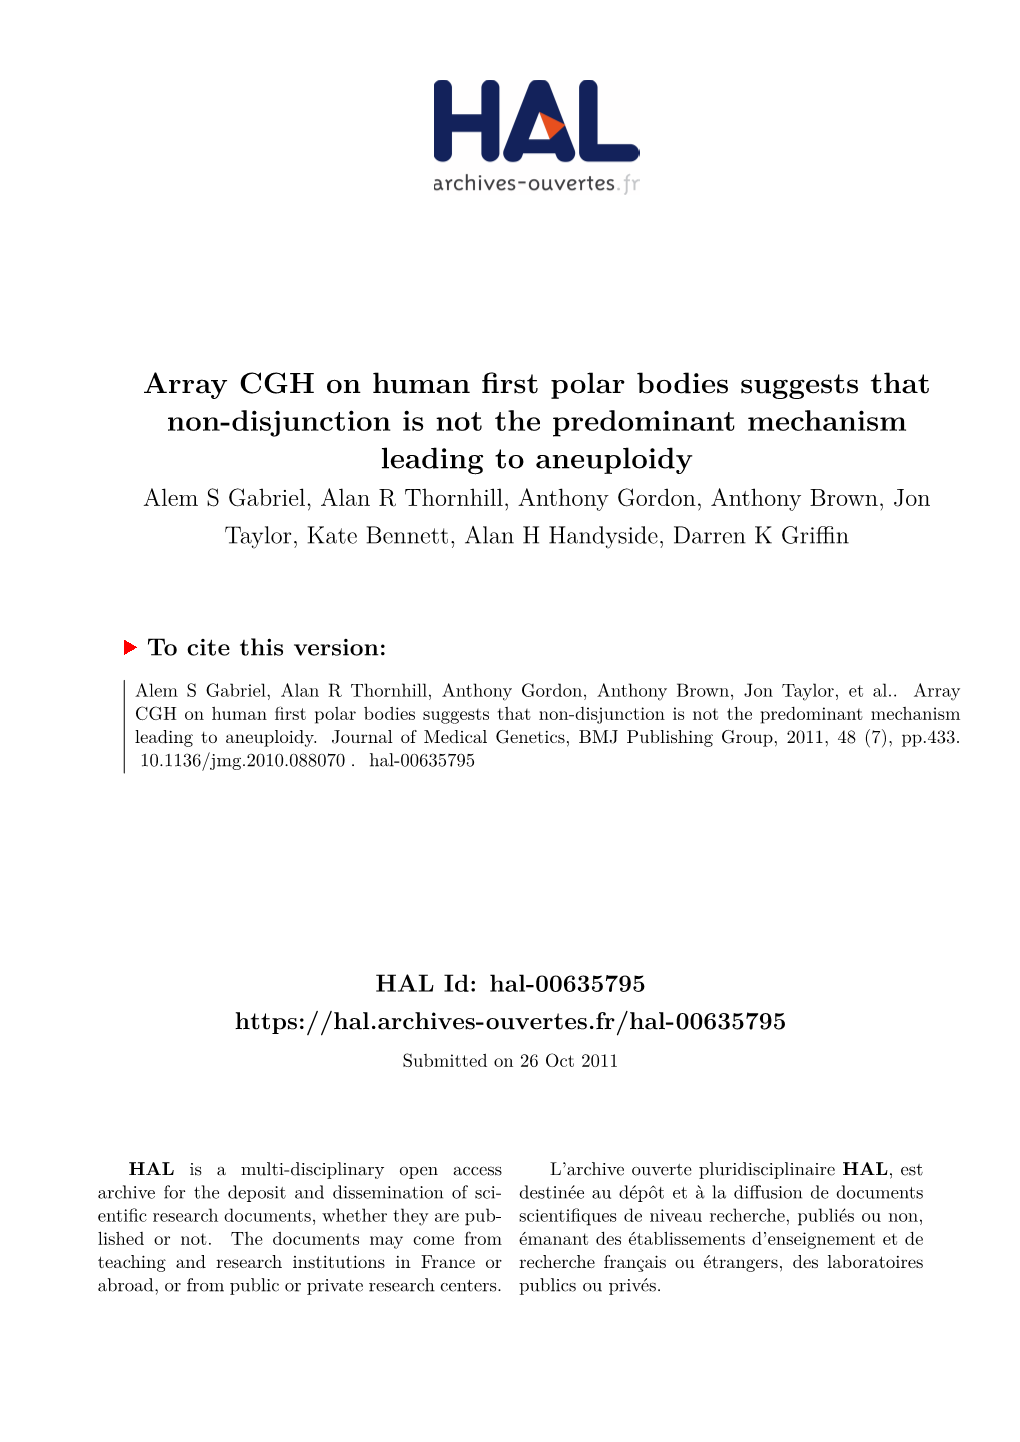 Array CGH on Human First Polar Bodies Suggests That Non